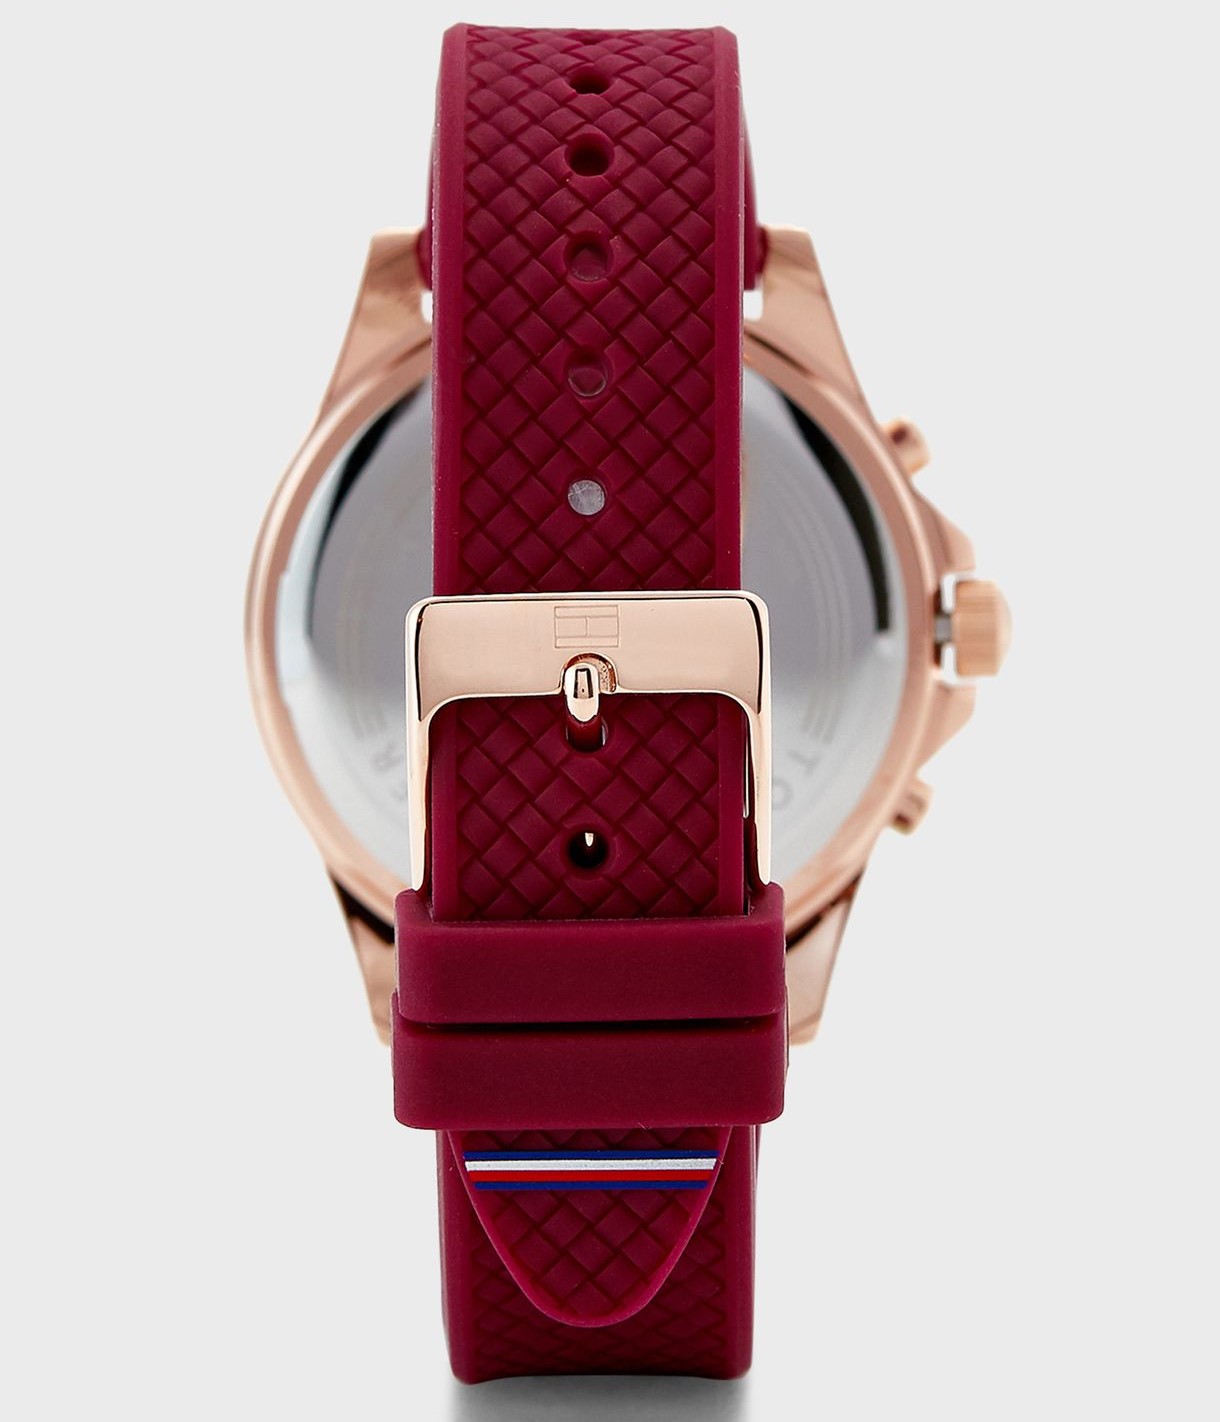 ĐỒNG HỒ ĐEO TAY NỮ TOMMY HILFIGER ROSE GOLD SPORT WATCH WITH RED SILICONE STRAP HAVEN ANALOG WATCH FOR WOMEN TH1782200W 7